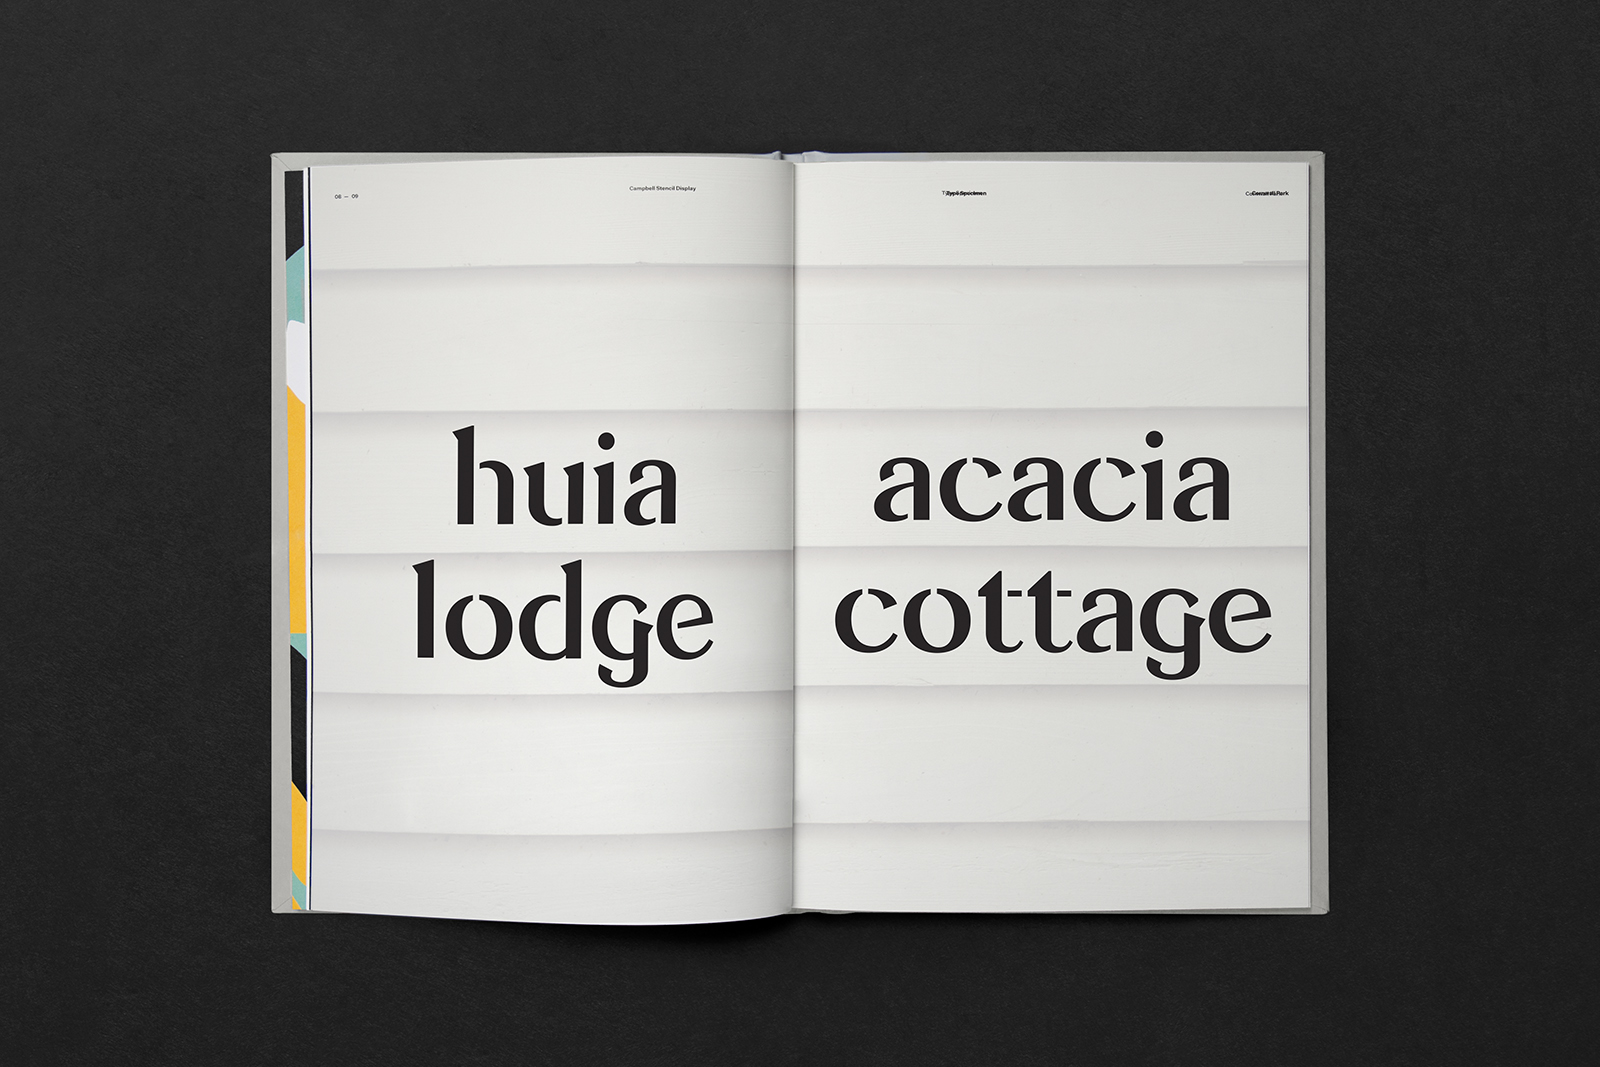 Open pages of book showcasing typeface at larger scale